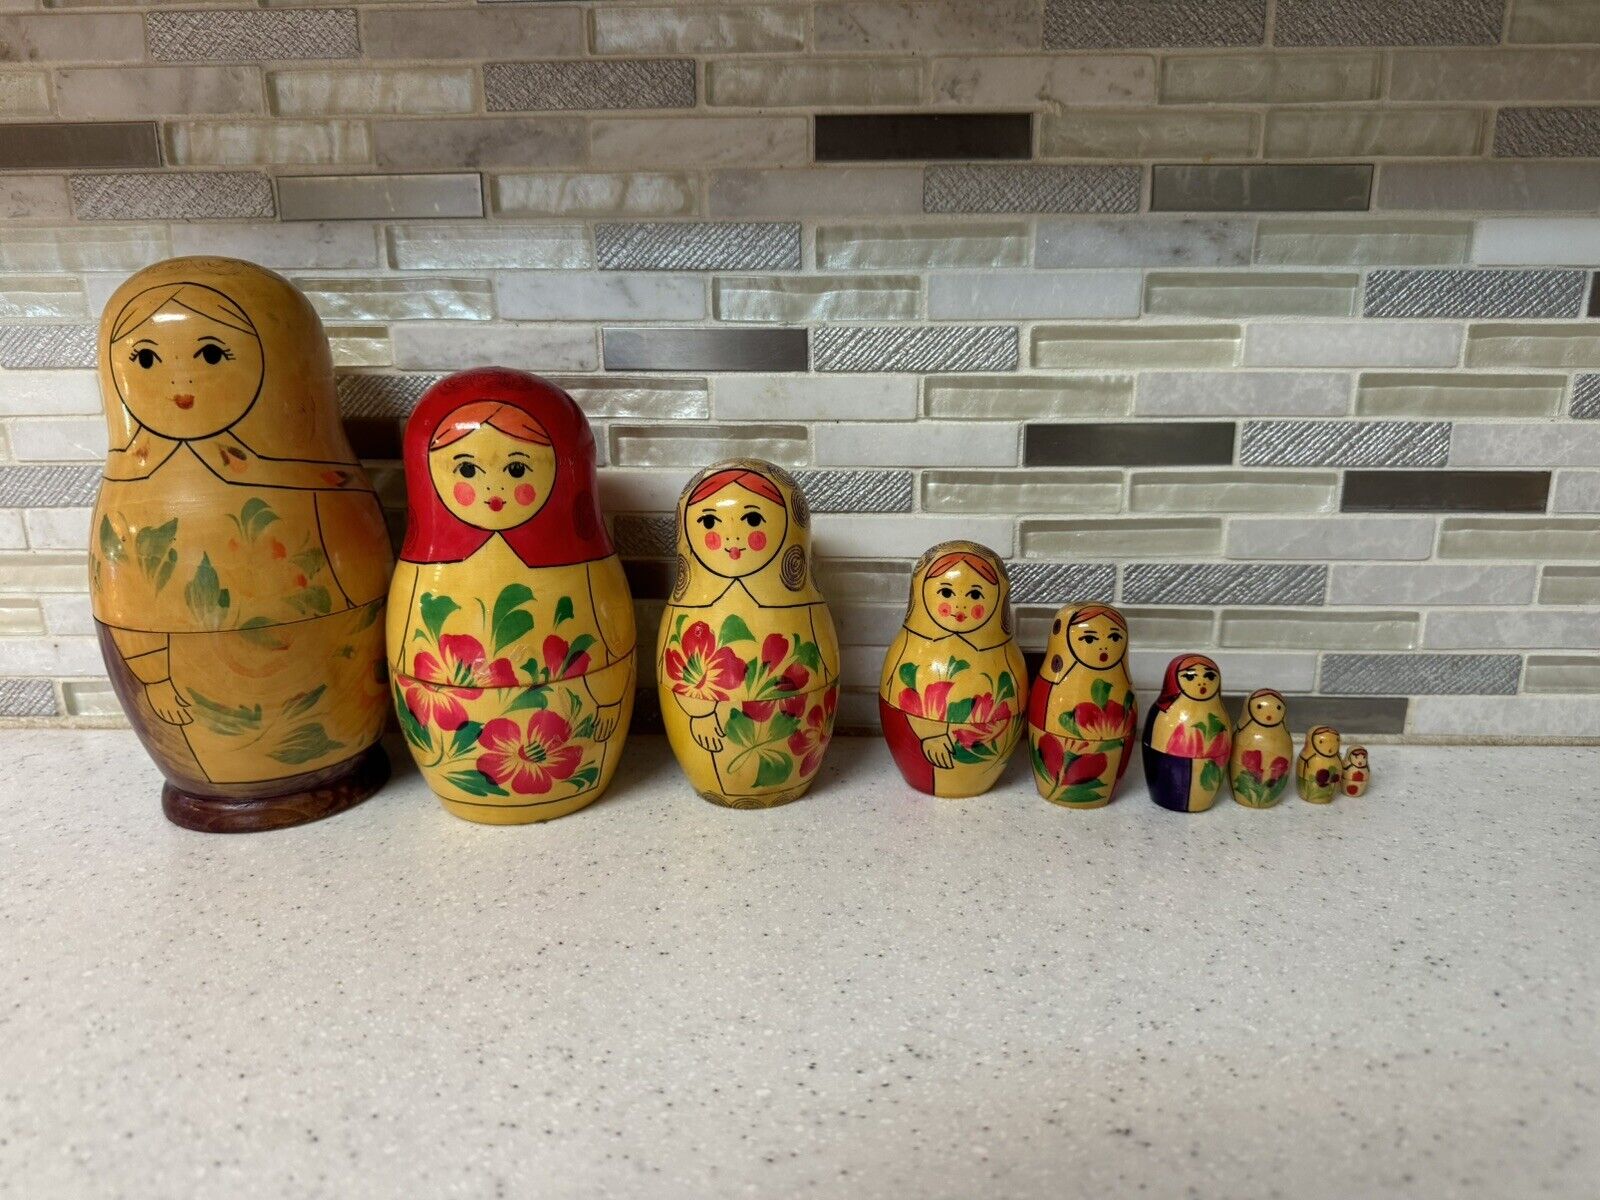 Vintage Handmade Hand Painted Authentic Russian Nesting Dolls 9 Pcs. 7” Tallest